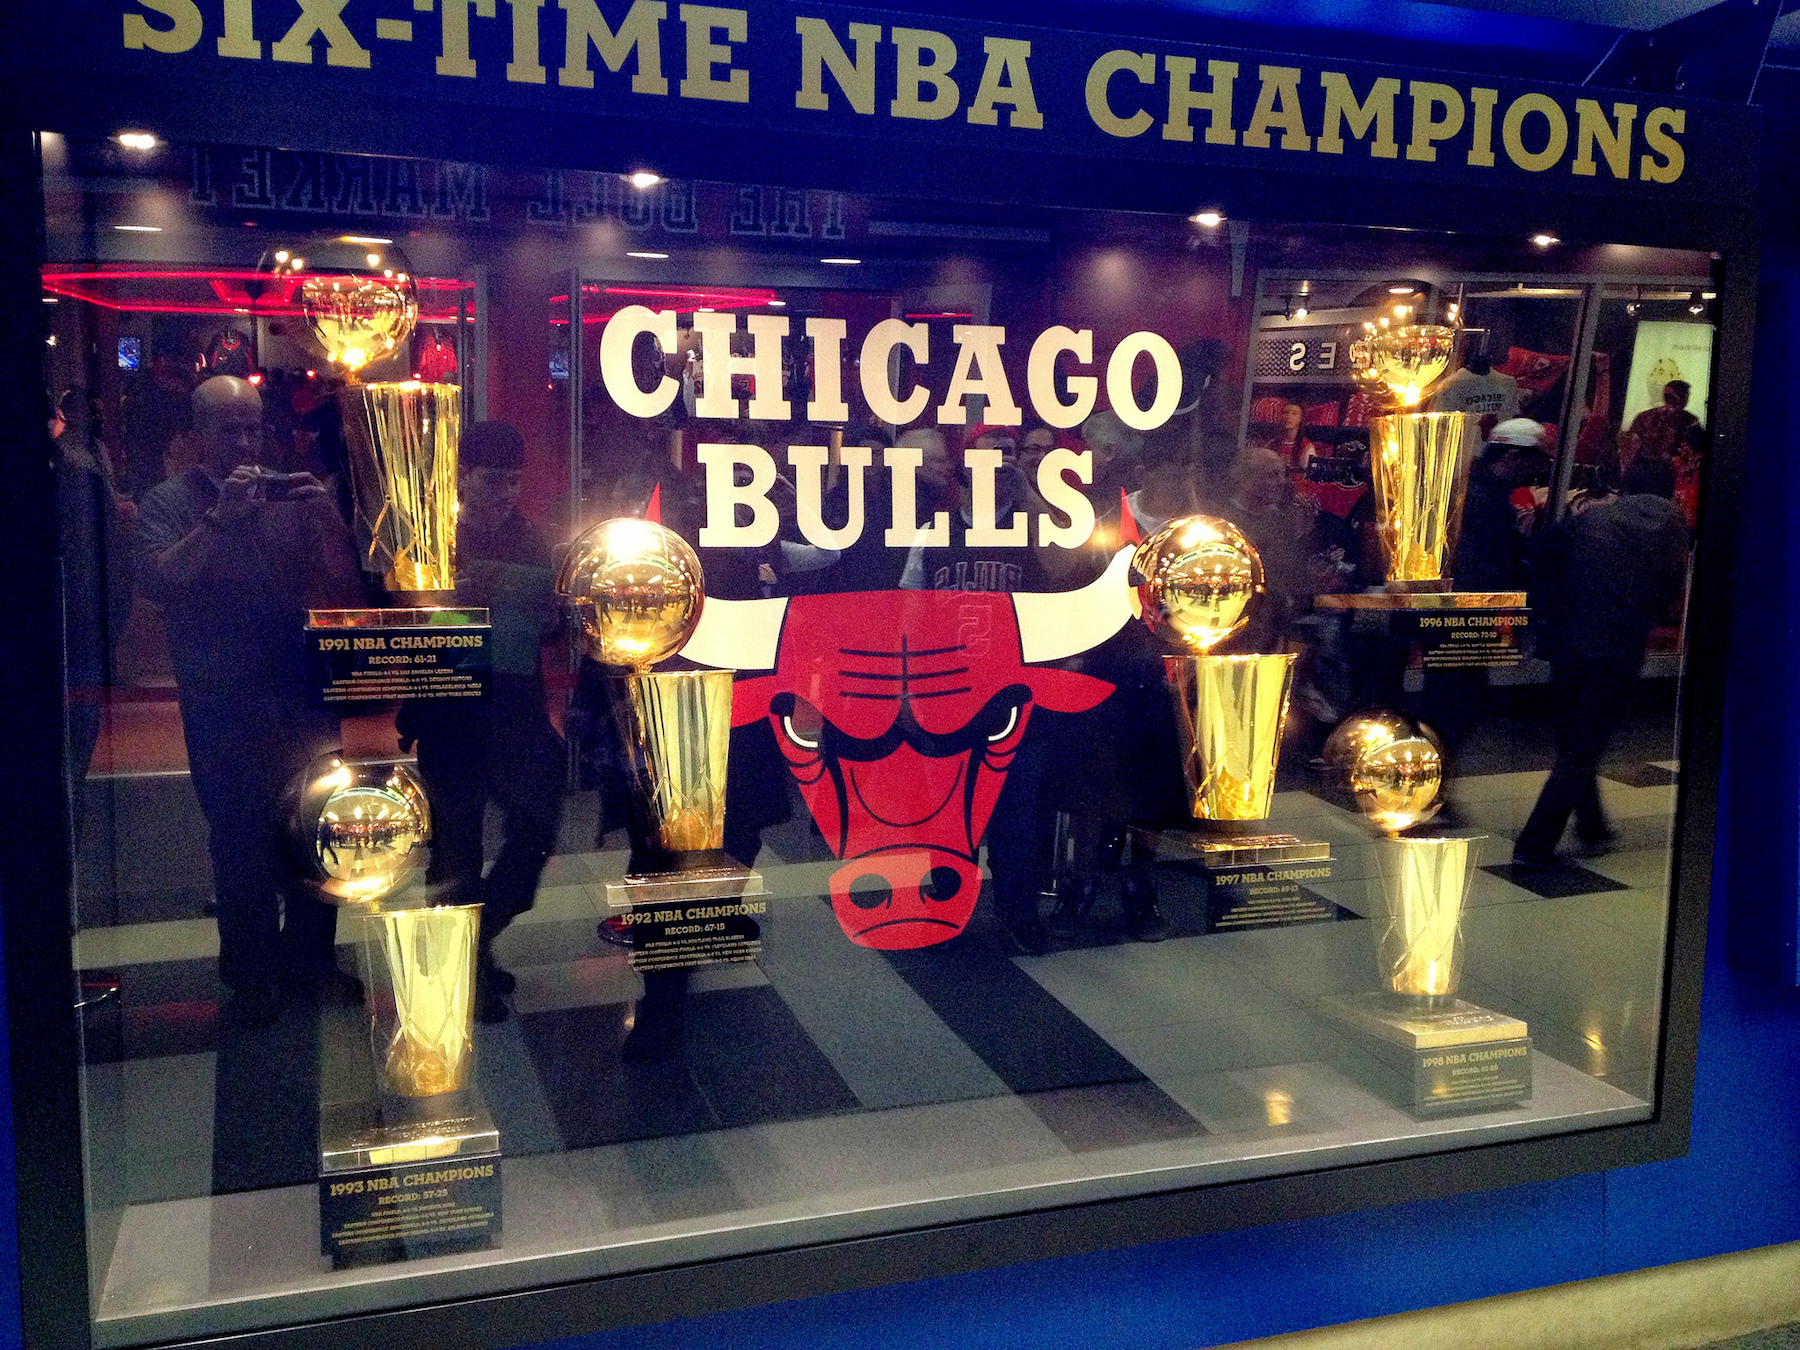 Chicago Bulls: The Franchise's All Time Great Starting Five